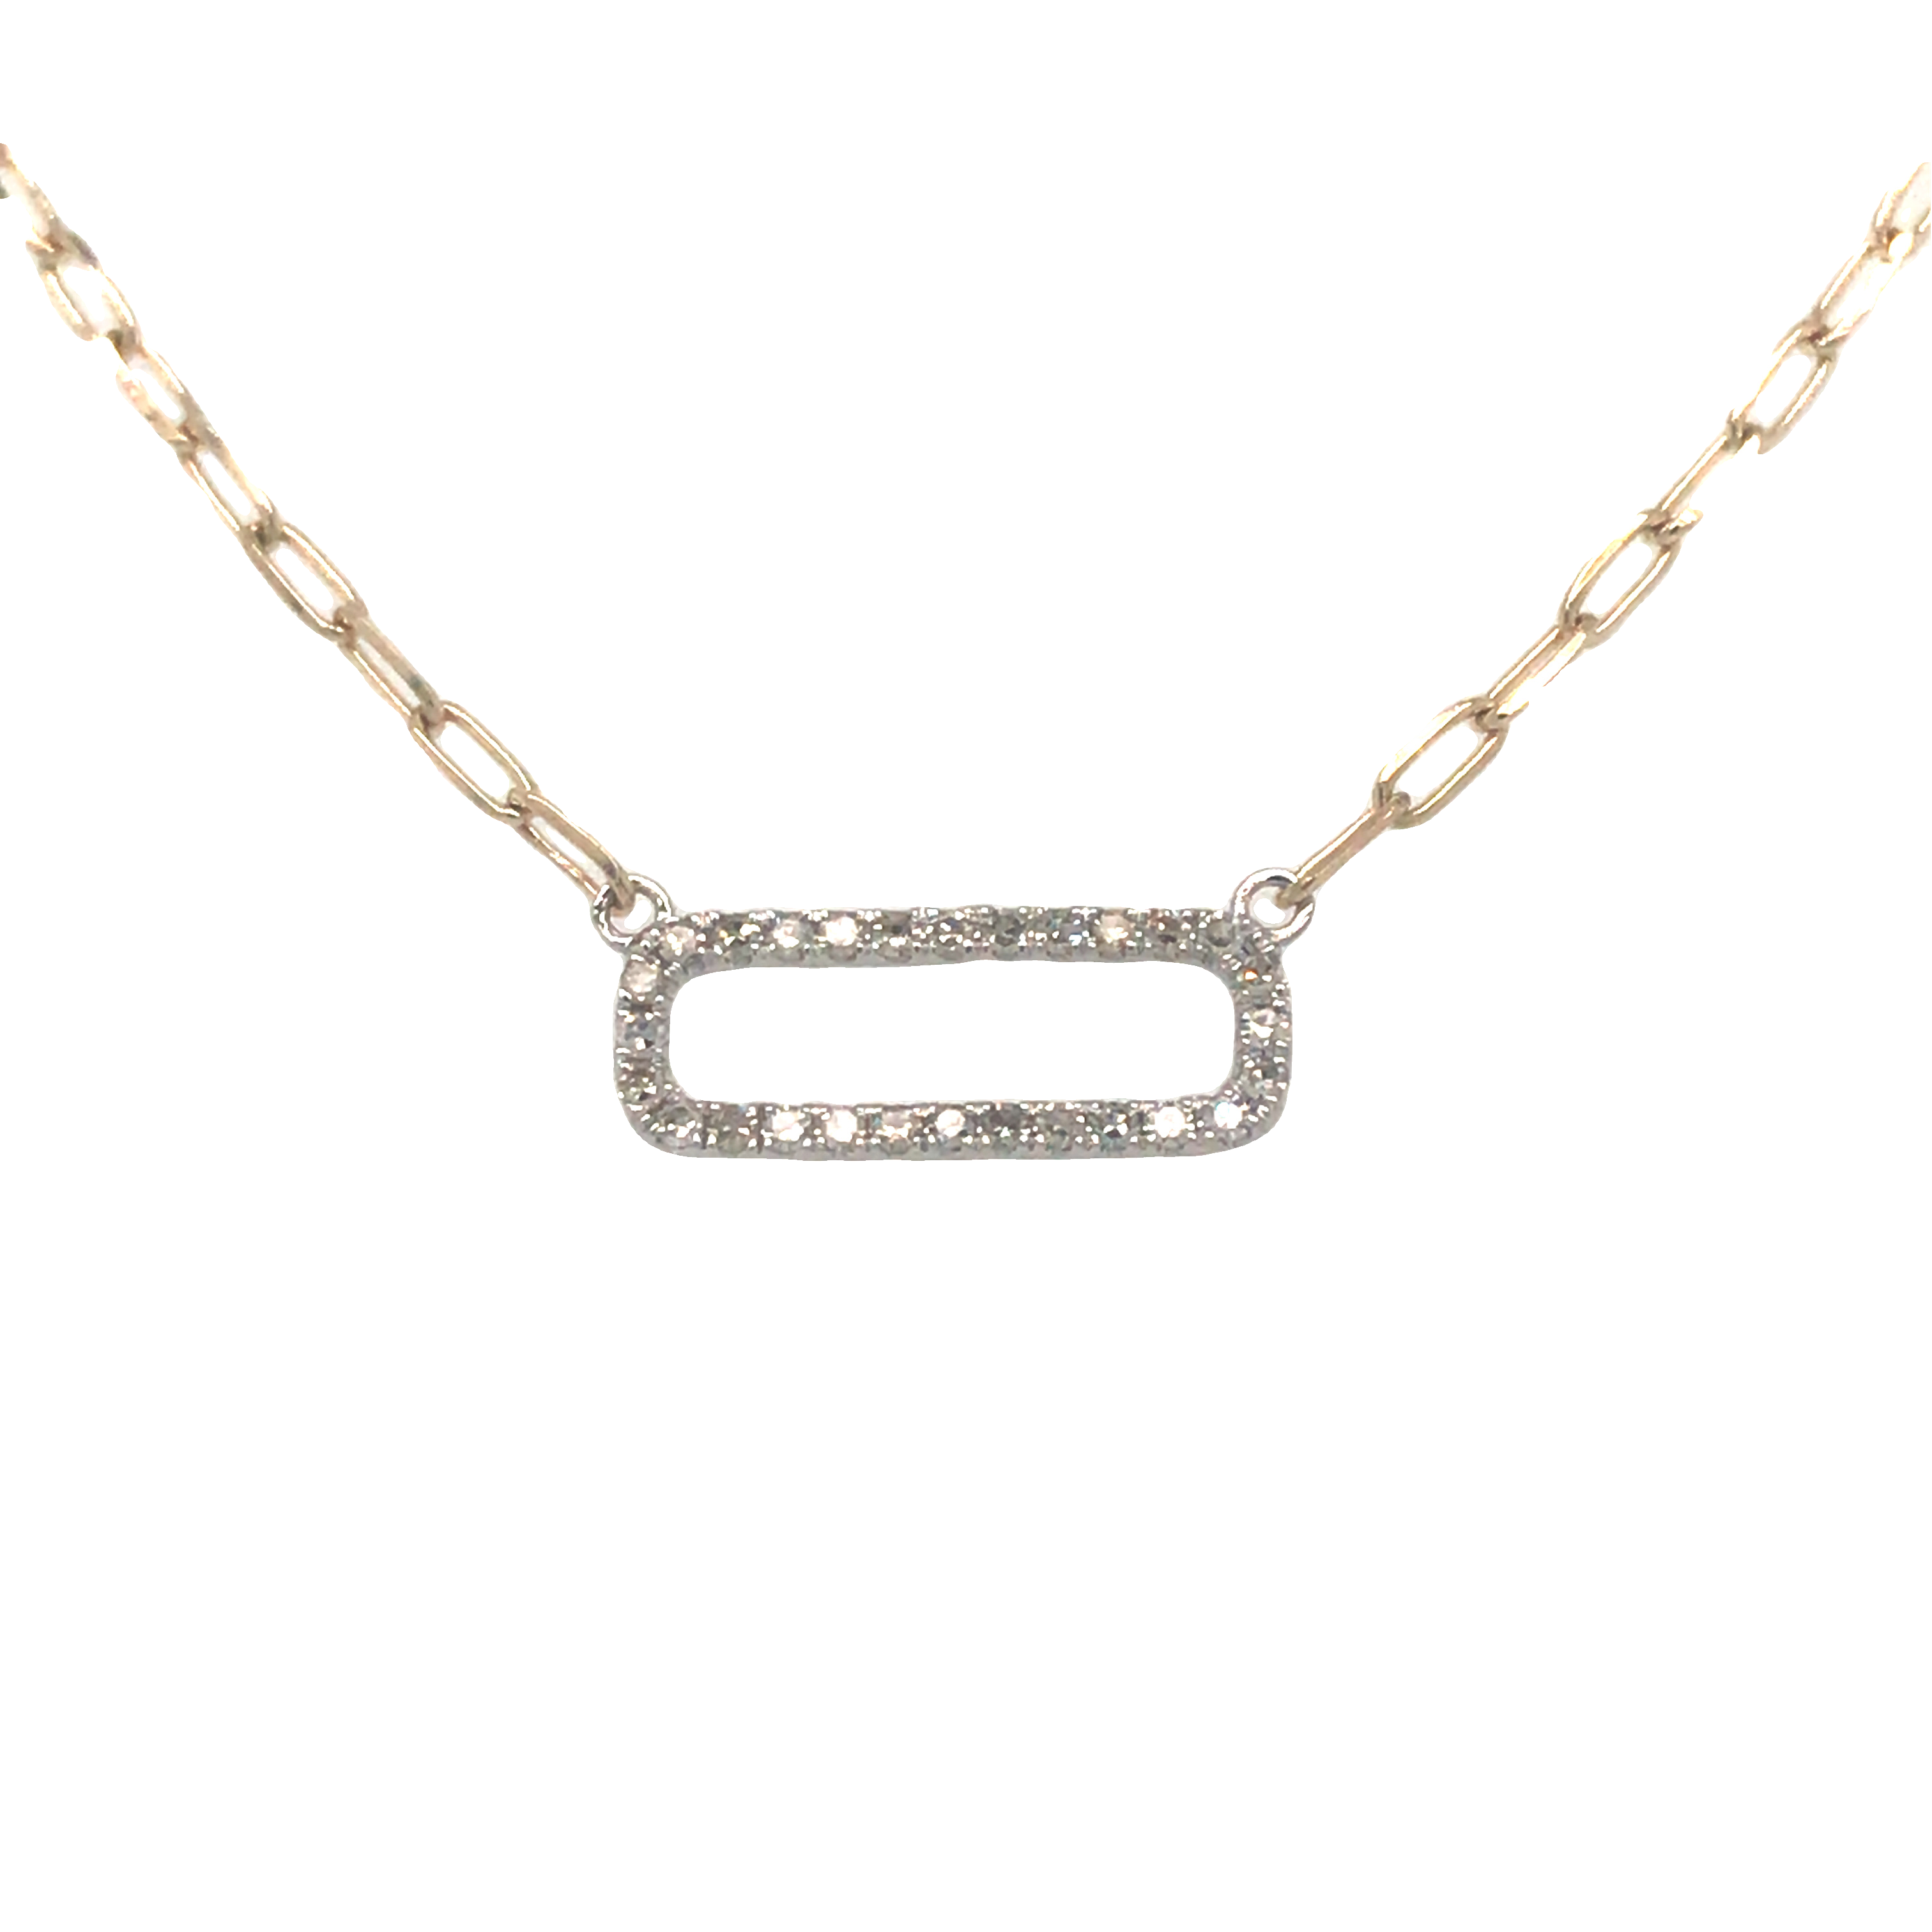 21 inch Paperclip Chain Necklace in 14K Yellow Gold